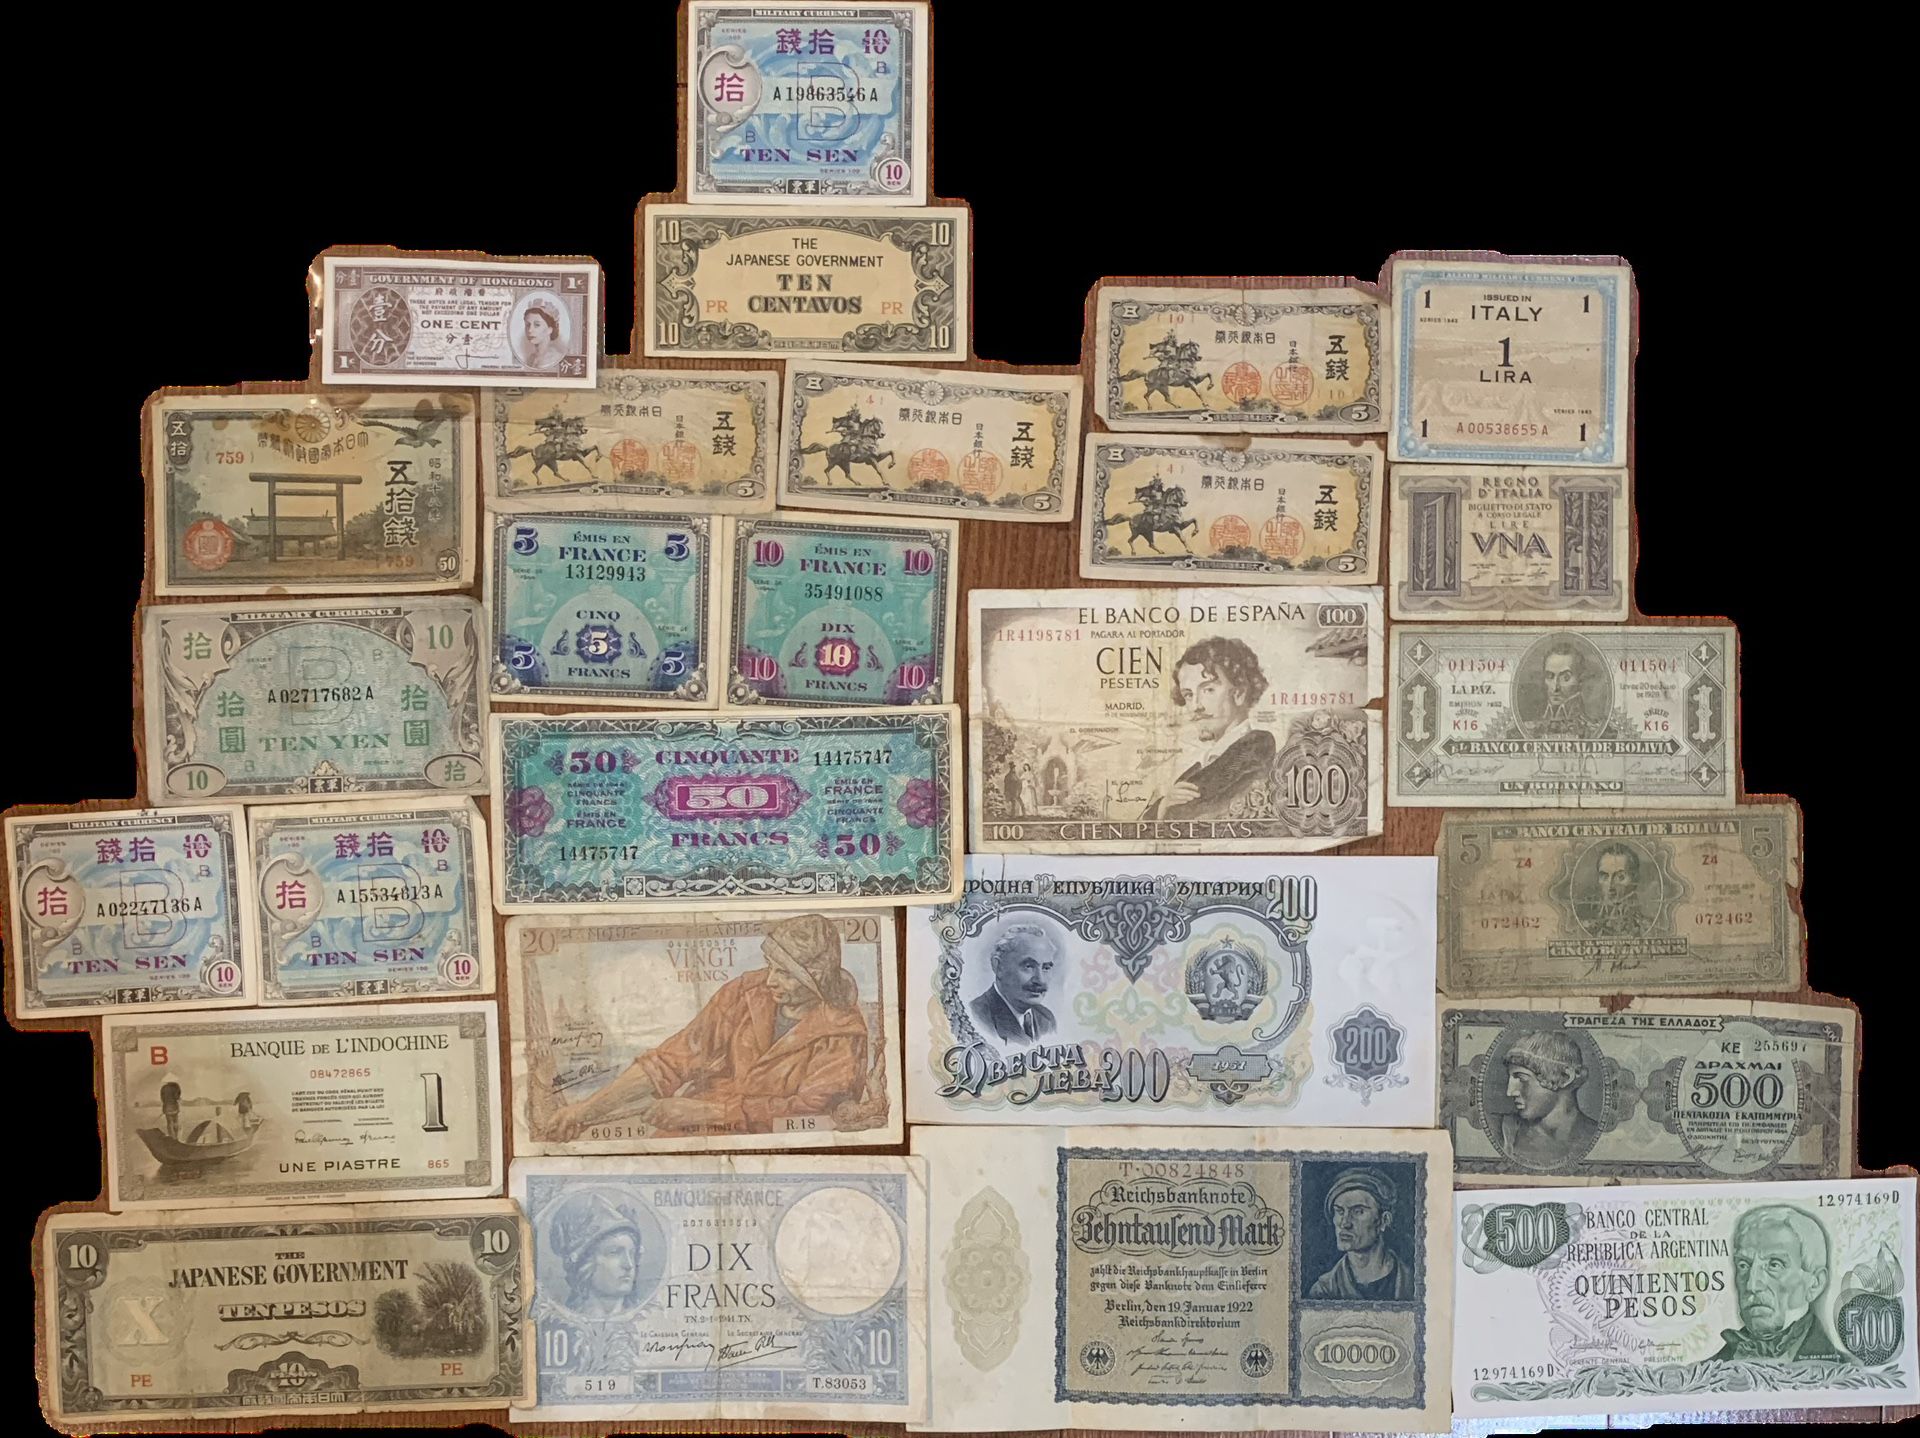 (27) Foreign Currency Banknotes